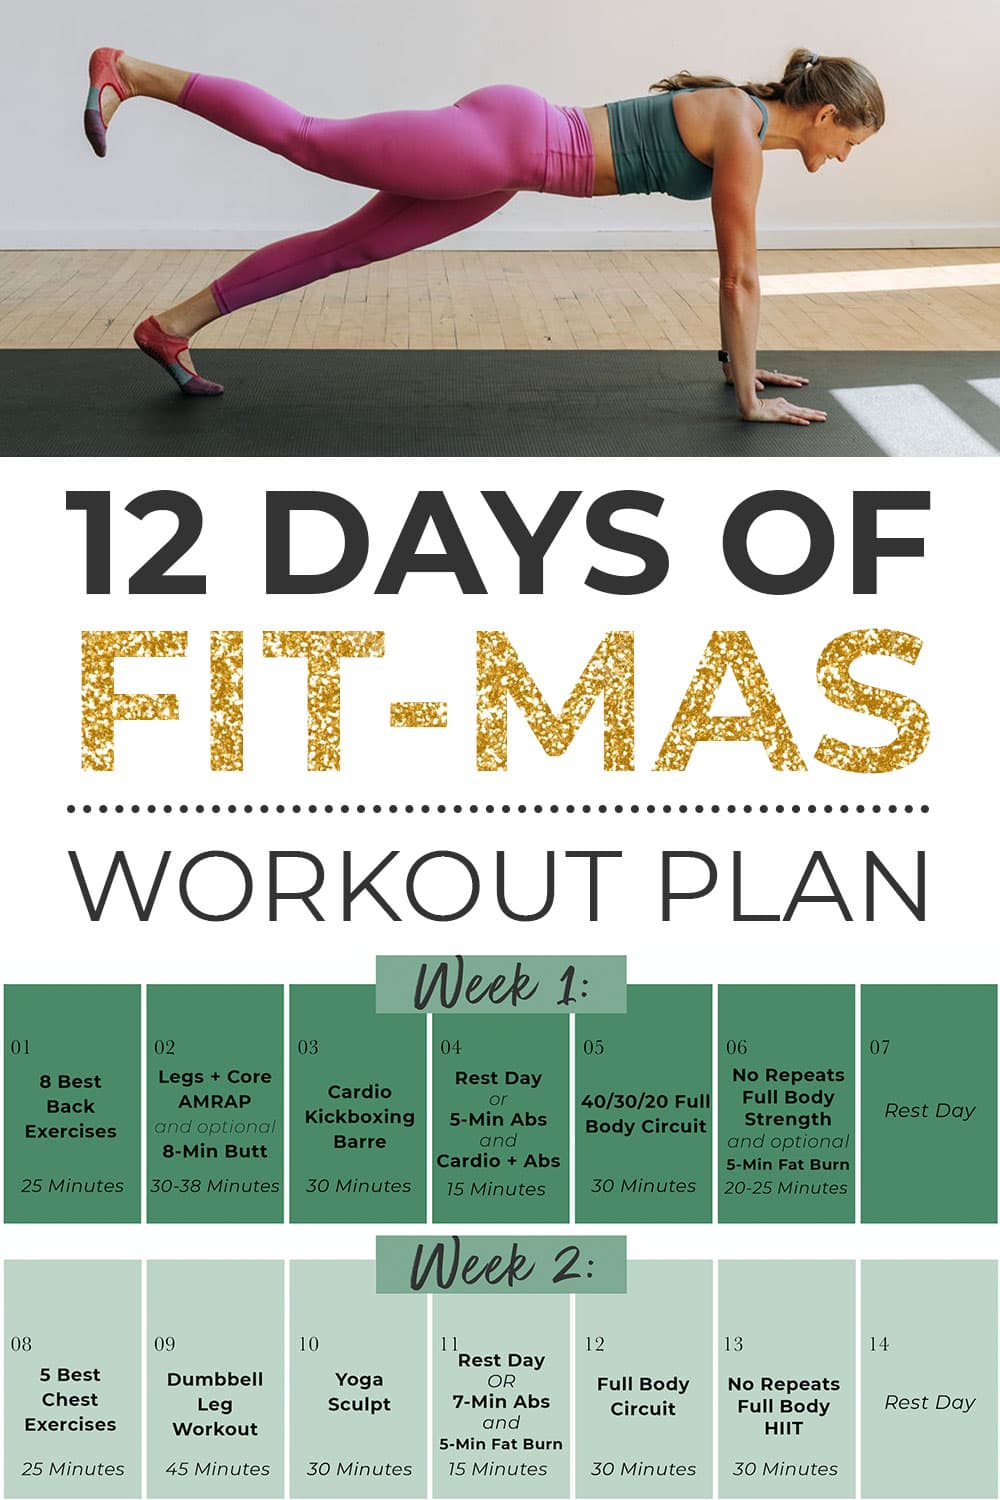 5 Day 14 day workout challenge for Build Muscle